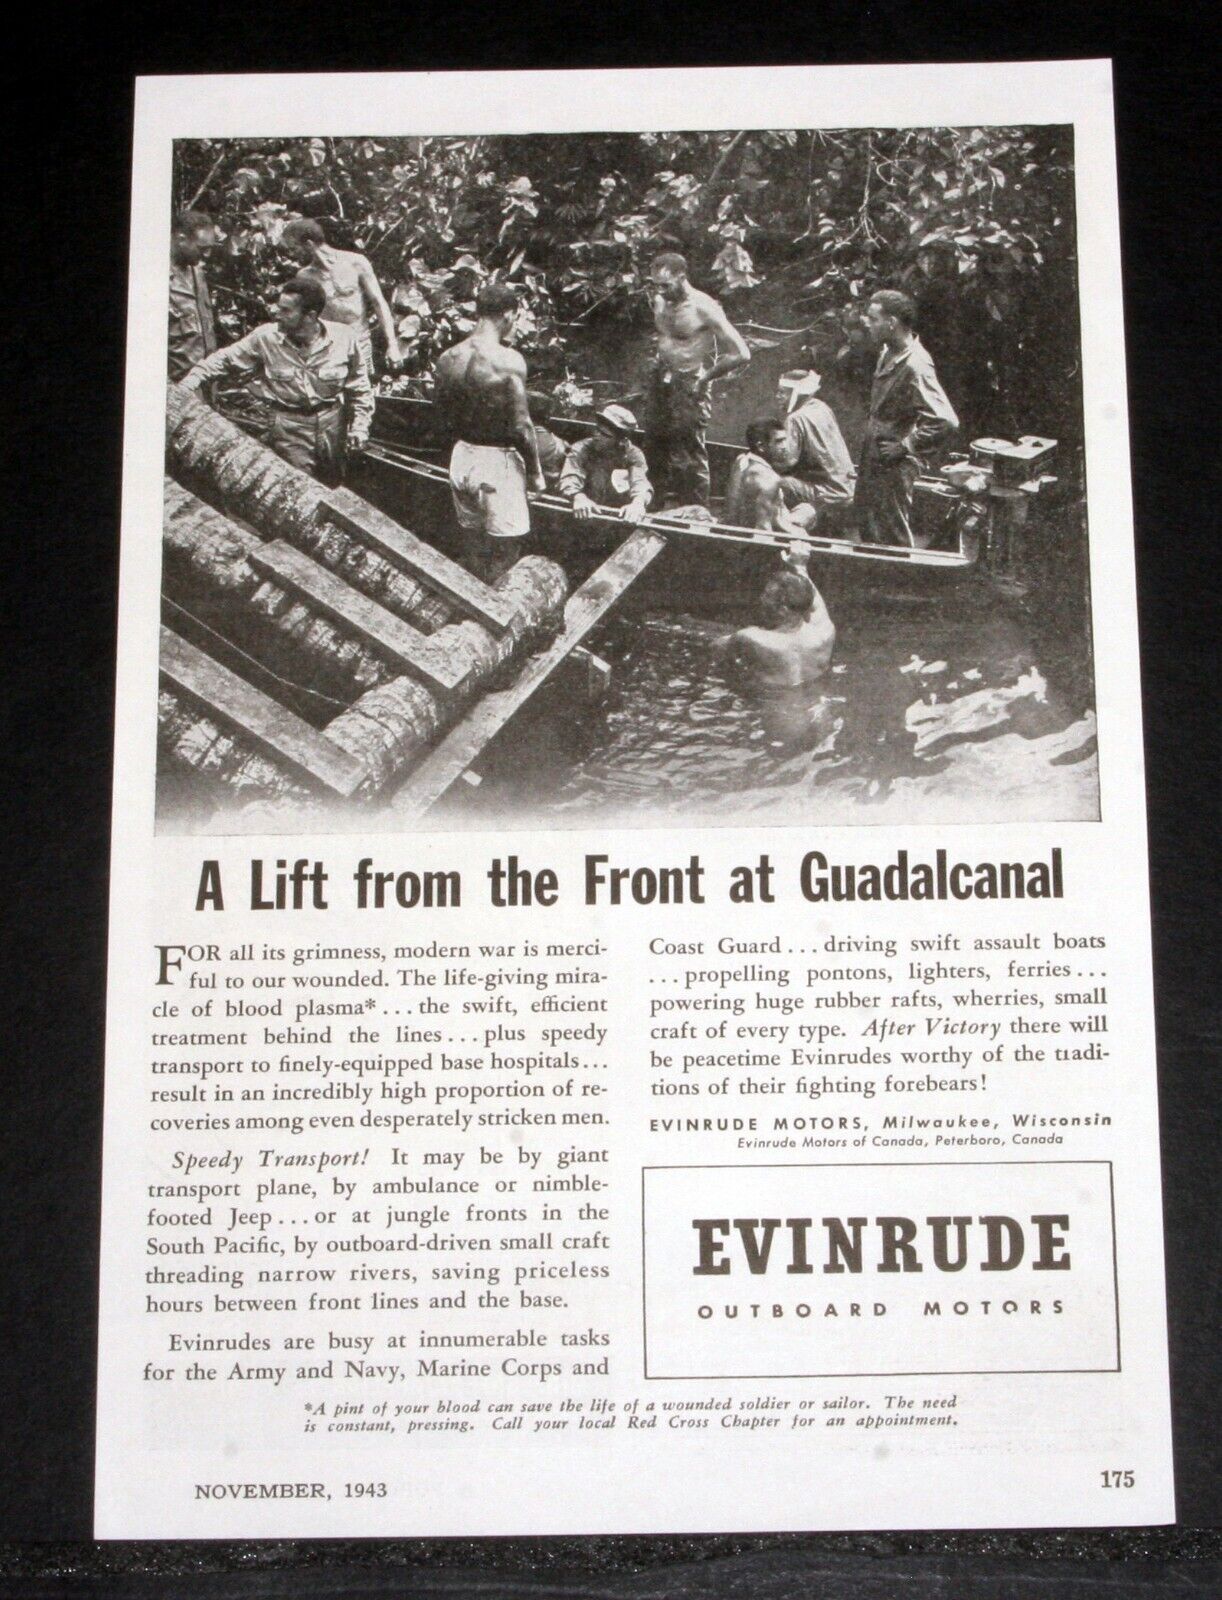 1943 OLD MAGAZINE PRINT AD, EVINRUDE OUTBOARD MOTORS, ON THE FRONT, GUADALCANAL